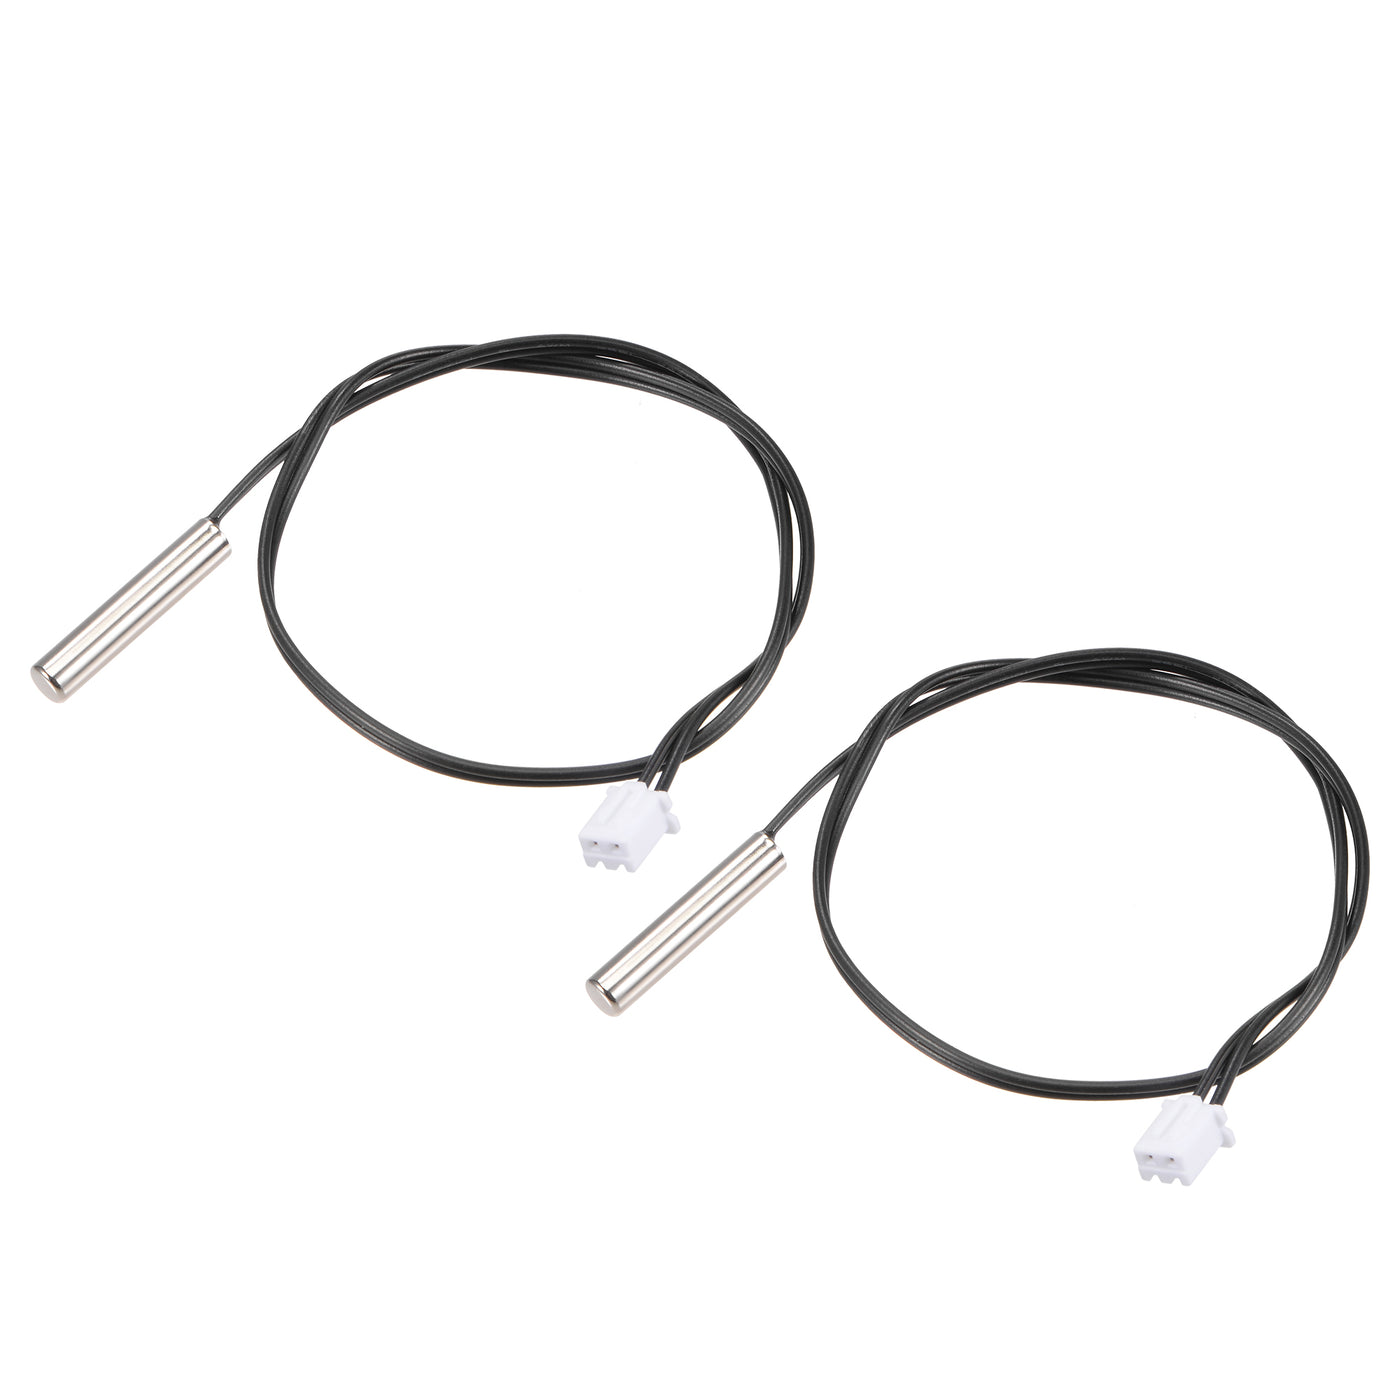 uxcell Uxcell 2pcs 20K Temperature Sensor Probe, Stainless Steel NTC Thermal Sensor Probe 30cm Digital Thermometer Extension Cable